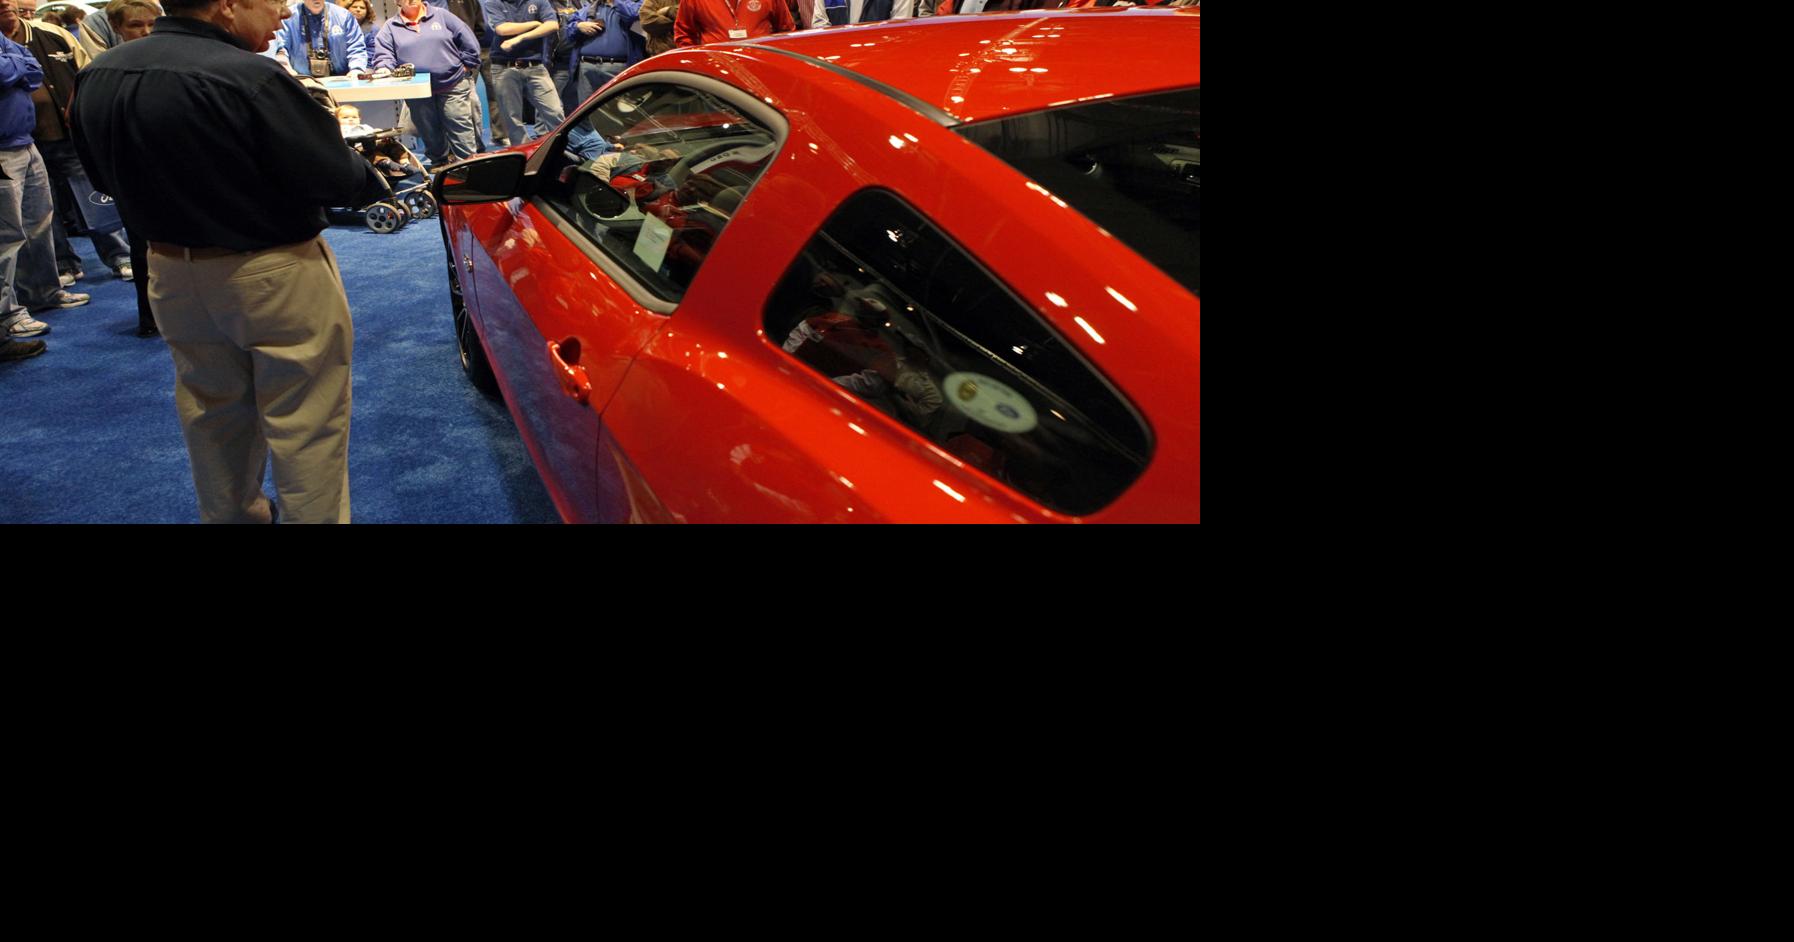 The St. Louis Auto Show opens today